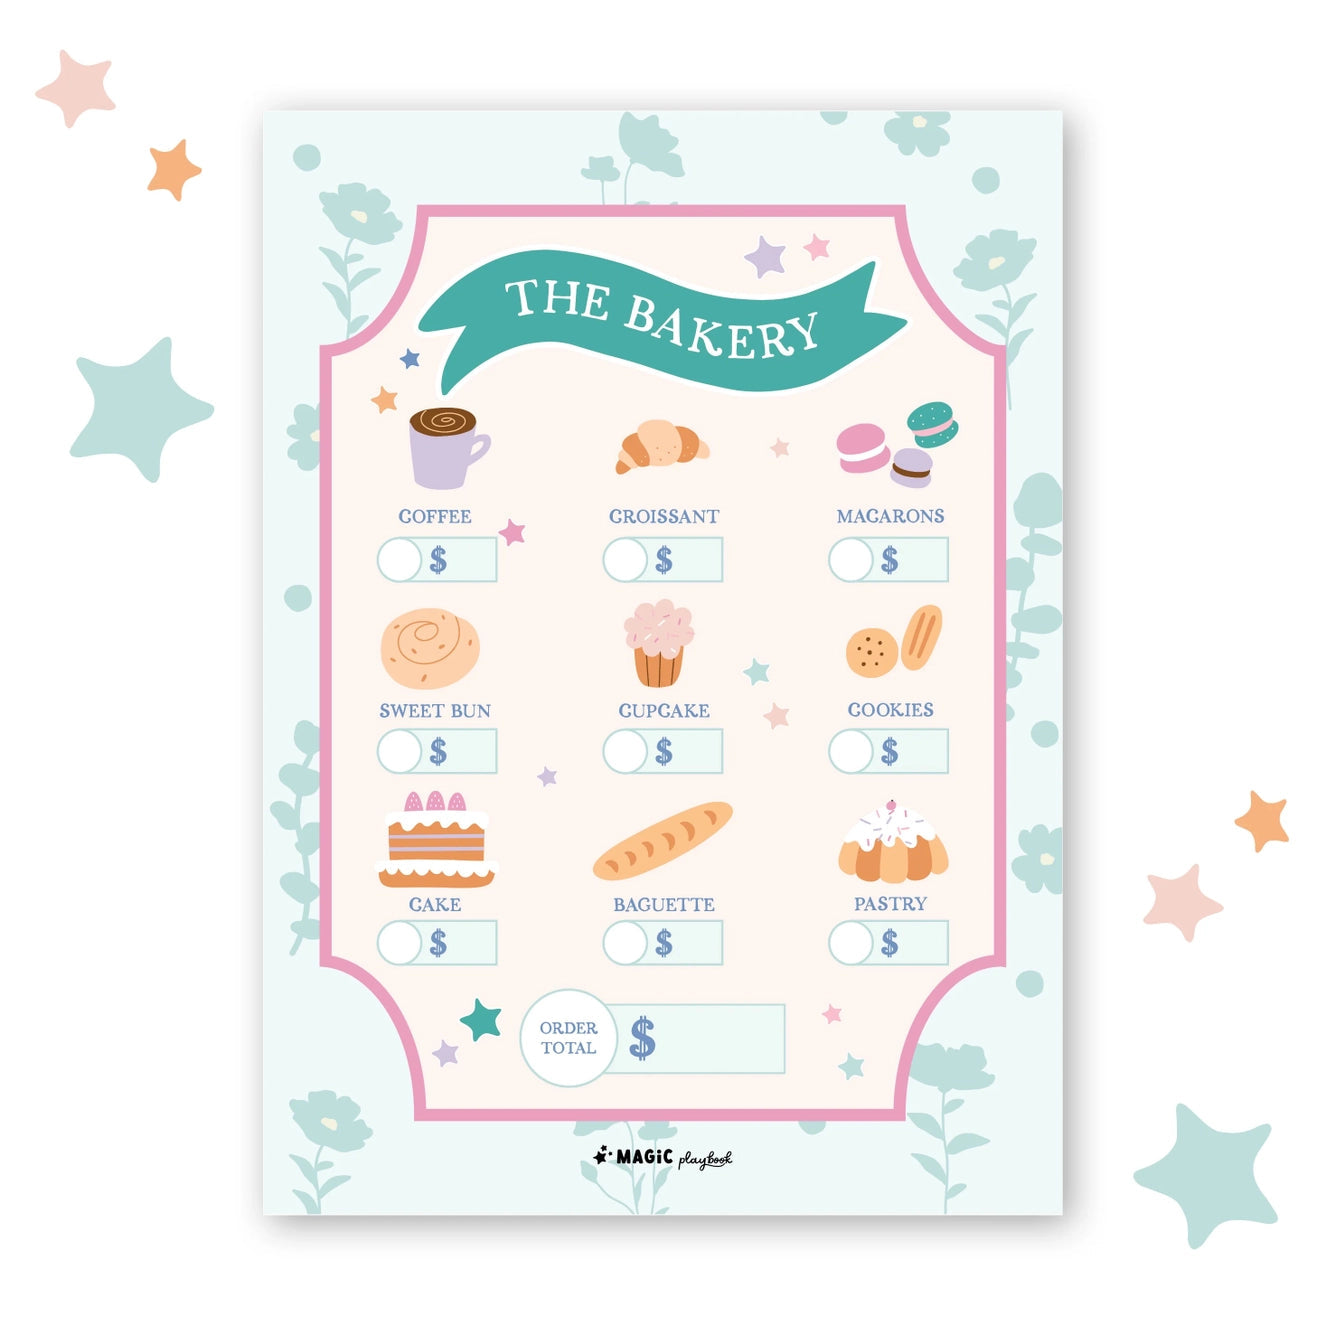 Pretend Play Notepad The Humming Arrow Boutique Hair Salon 